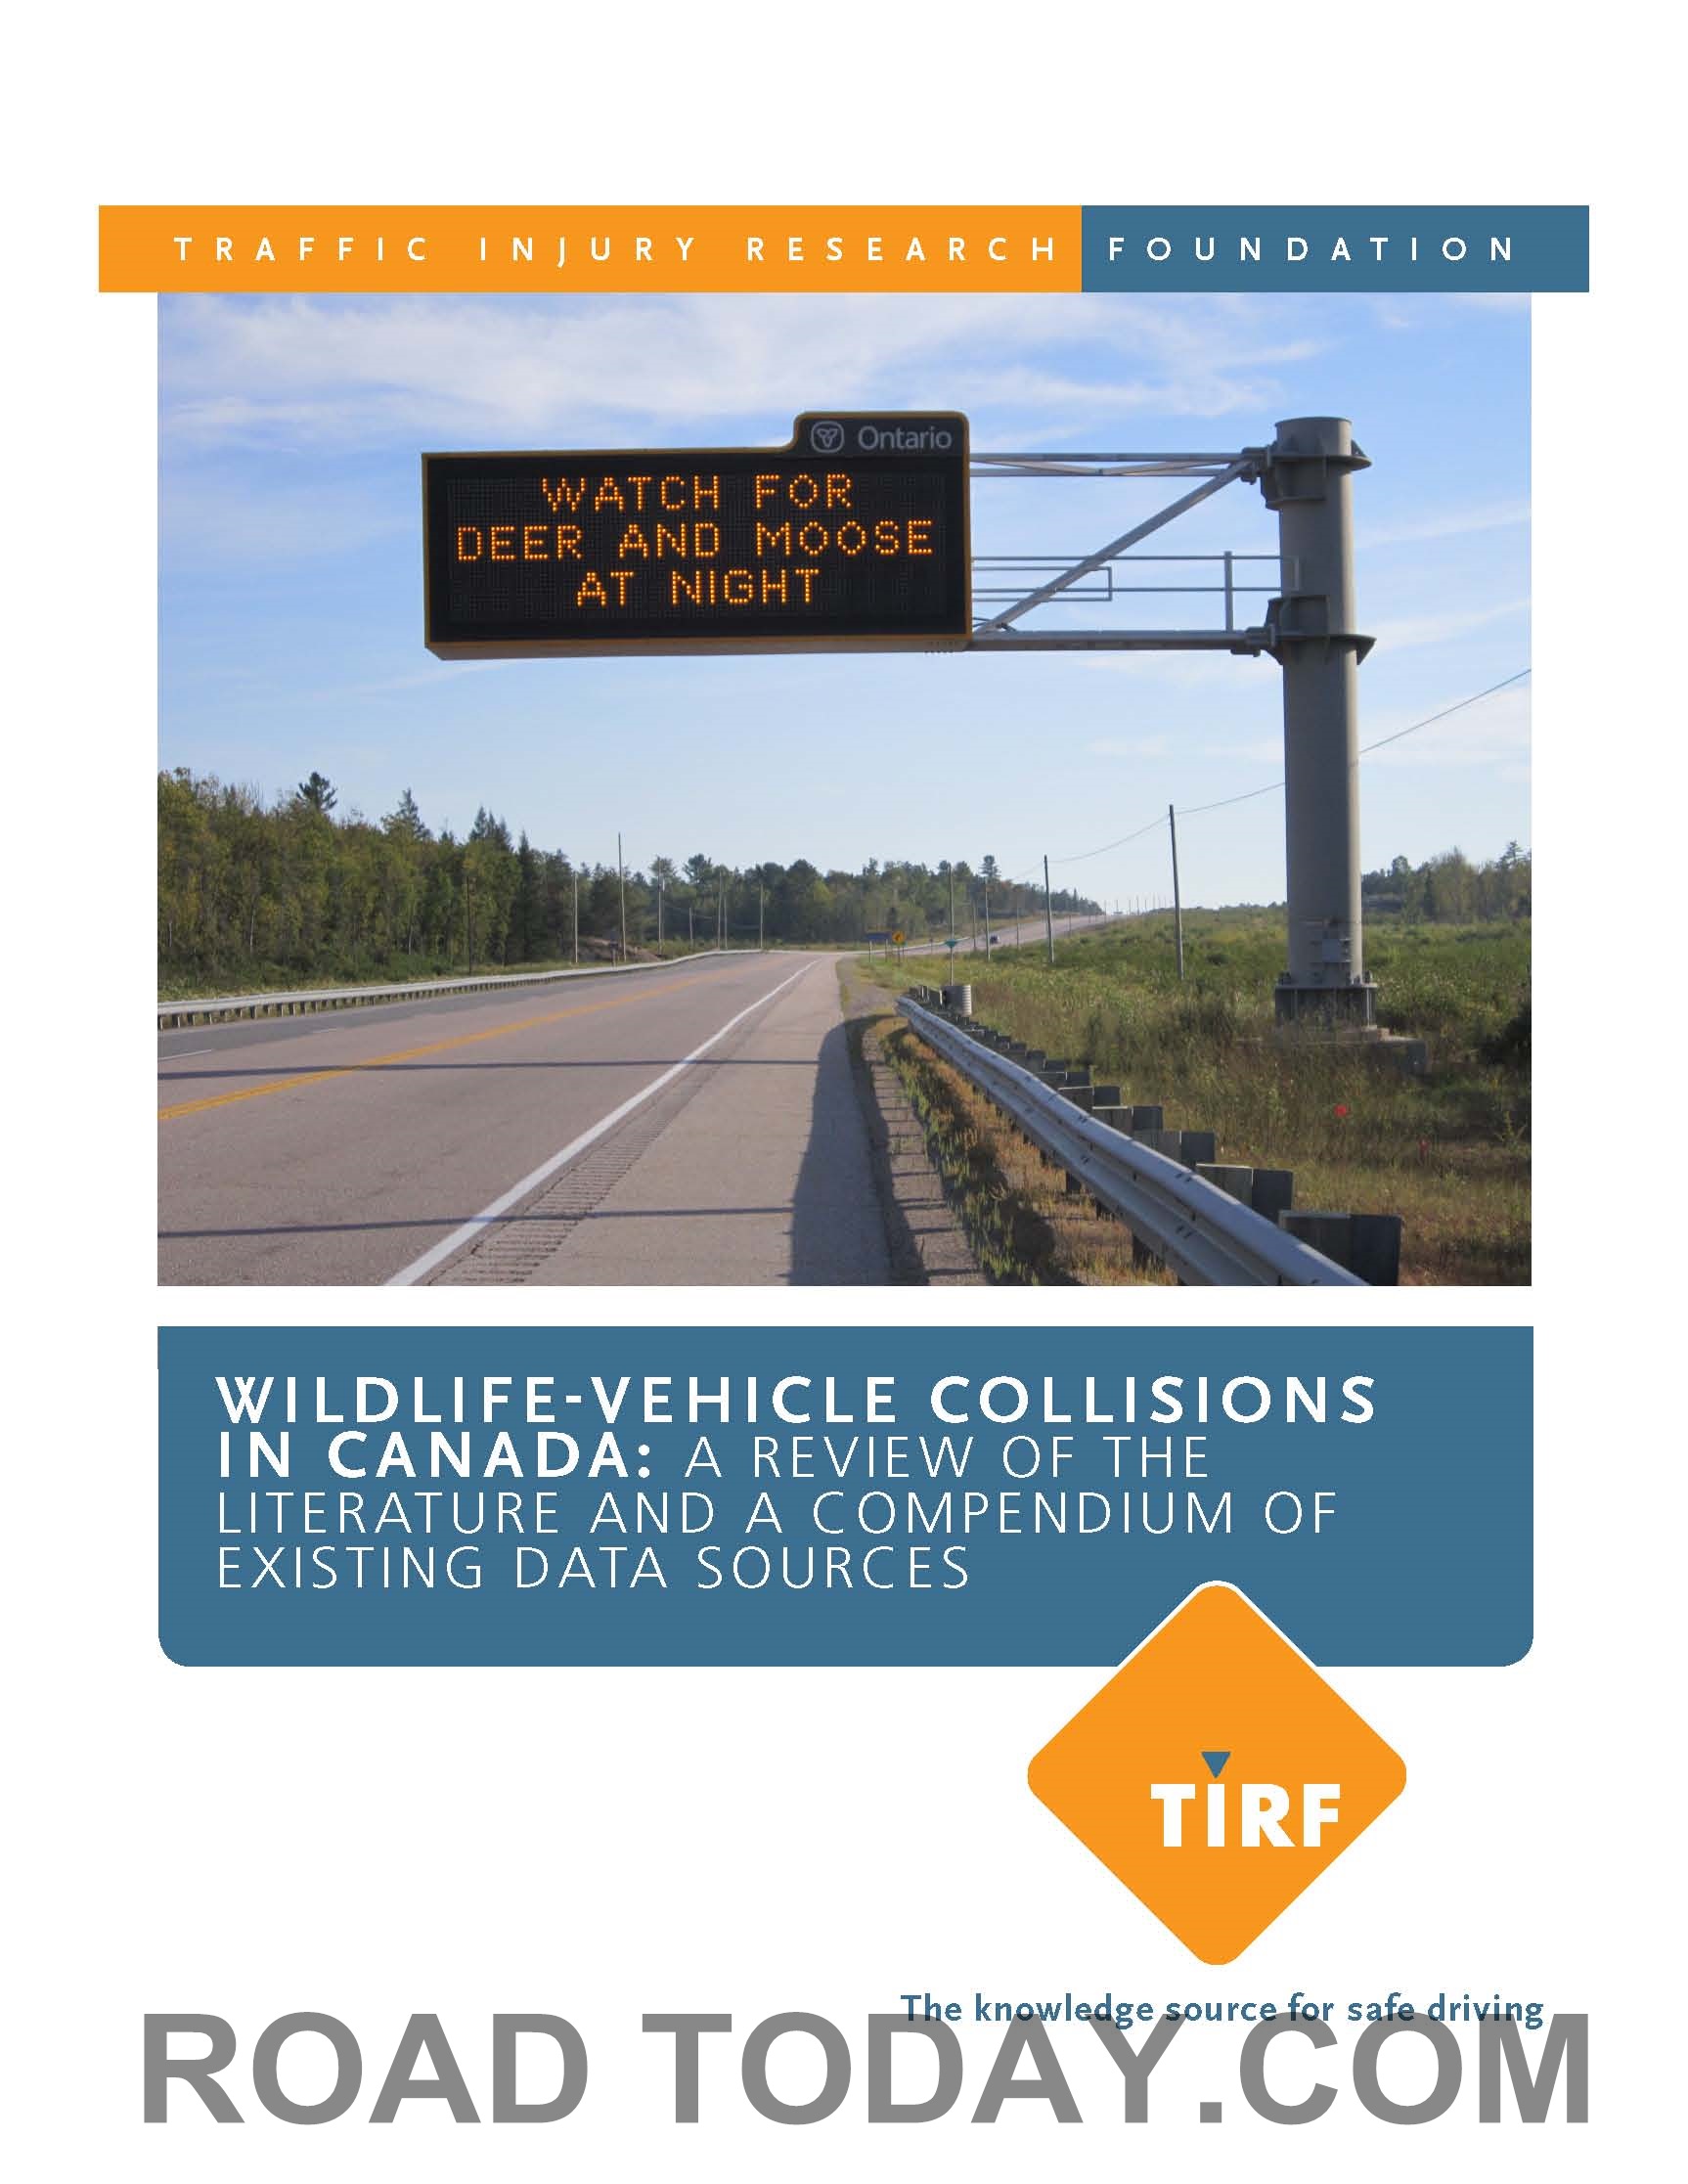 TIRF, Eco-Kare and State Farm release findings regarding wildlife-vehicle collisions in Canada